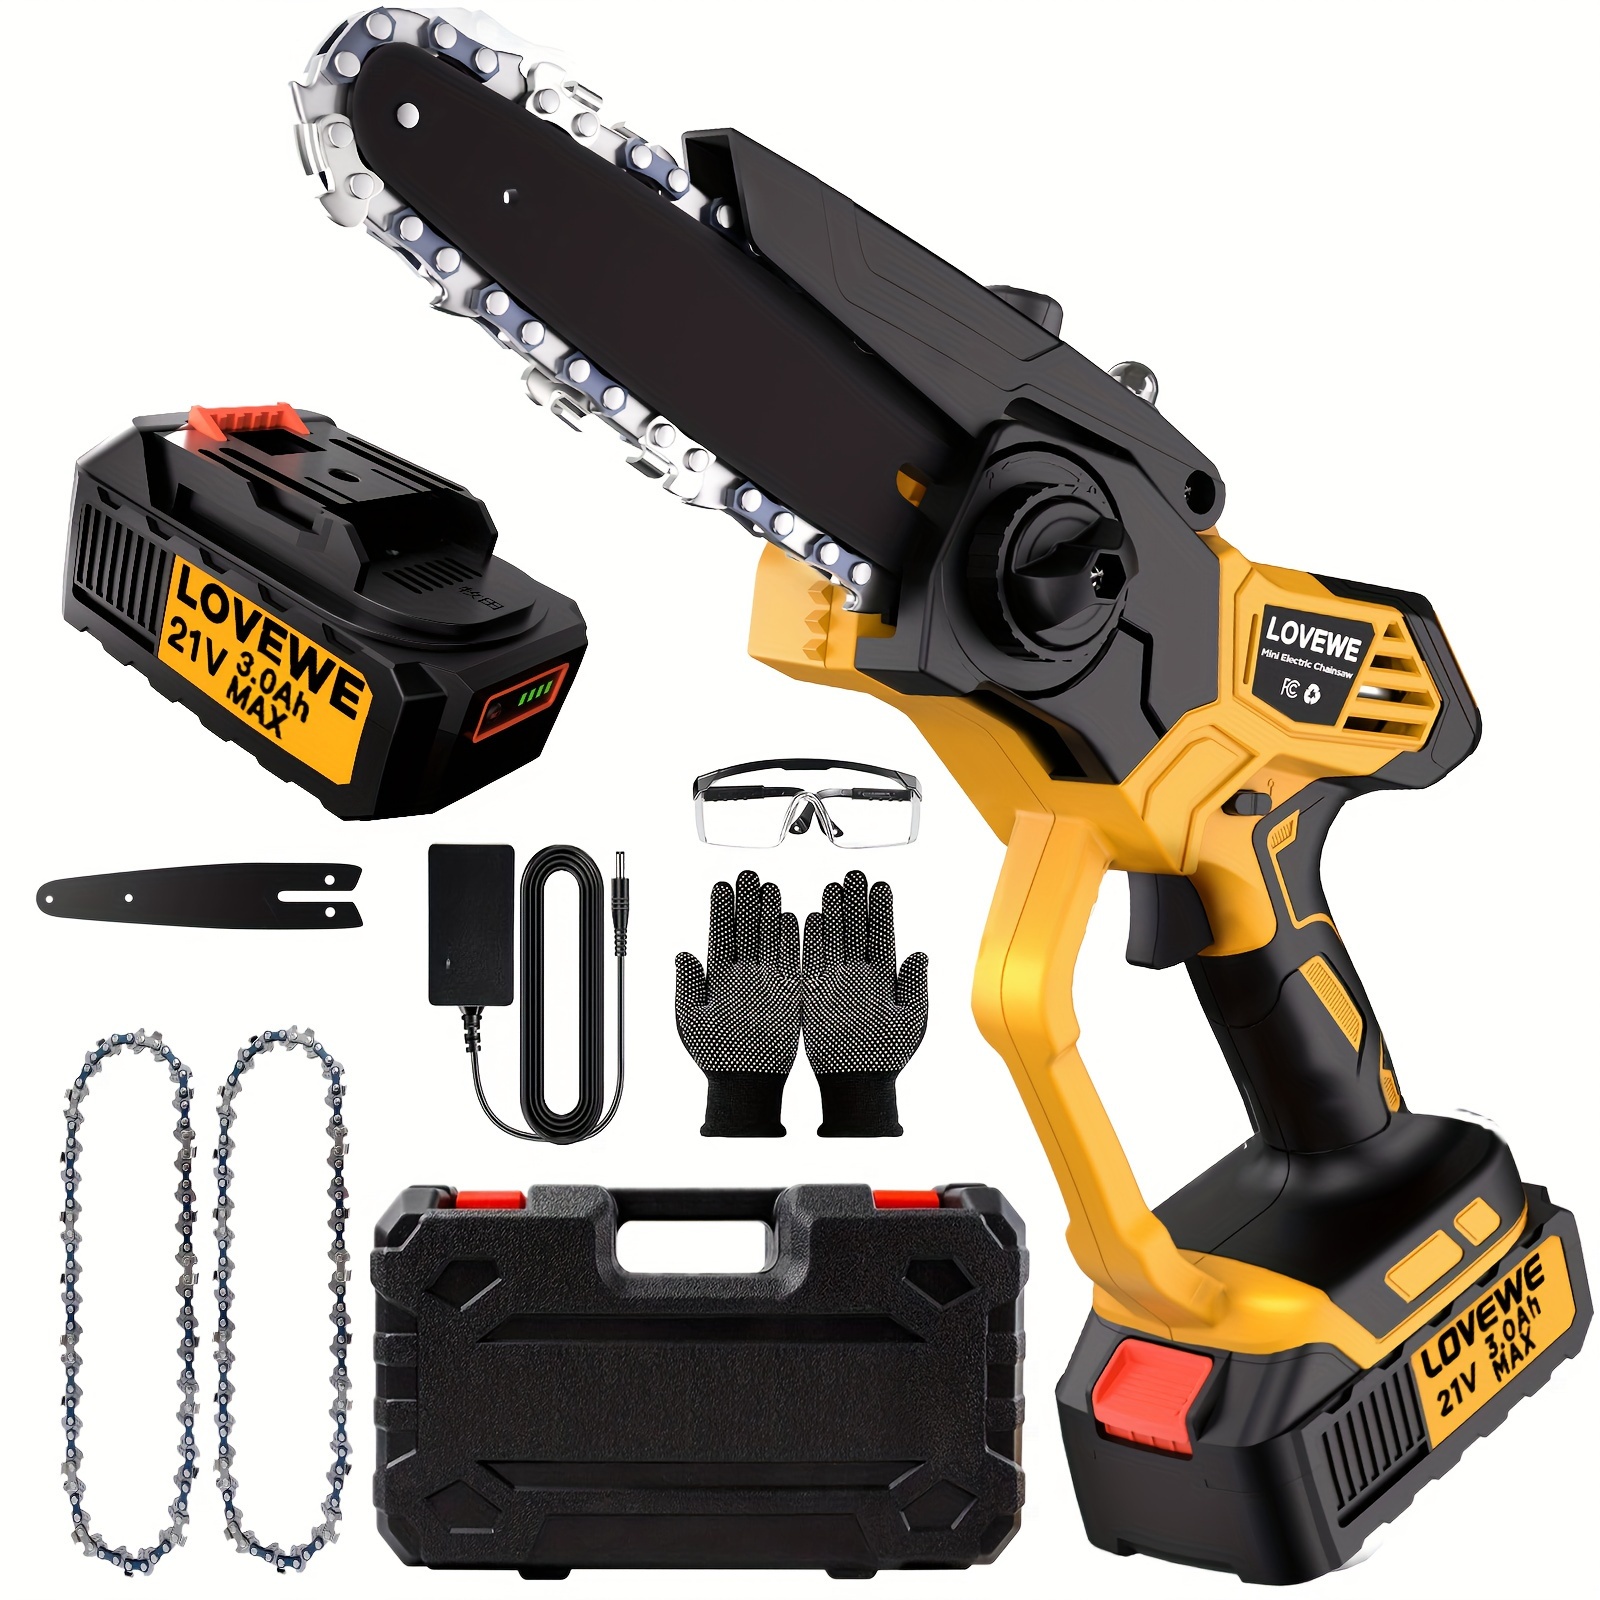 

Mini Chainsaw Cordless, 6 Inch Handheld Electric Chain Saw With 3.0ah Battery, 23ft/s Speed - Automatic Chain Tensioning & Auto Oiler For Tree Branches, Courtyard, Household, And Garden